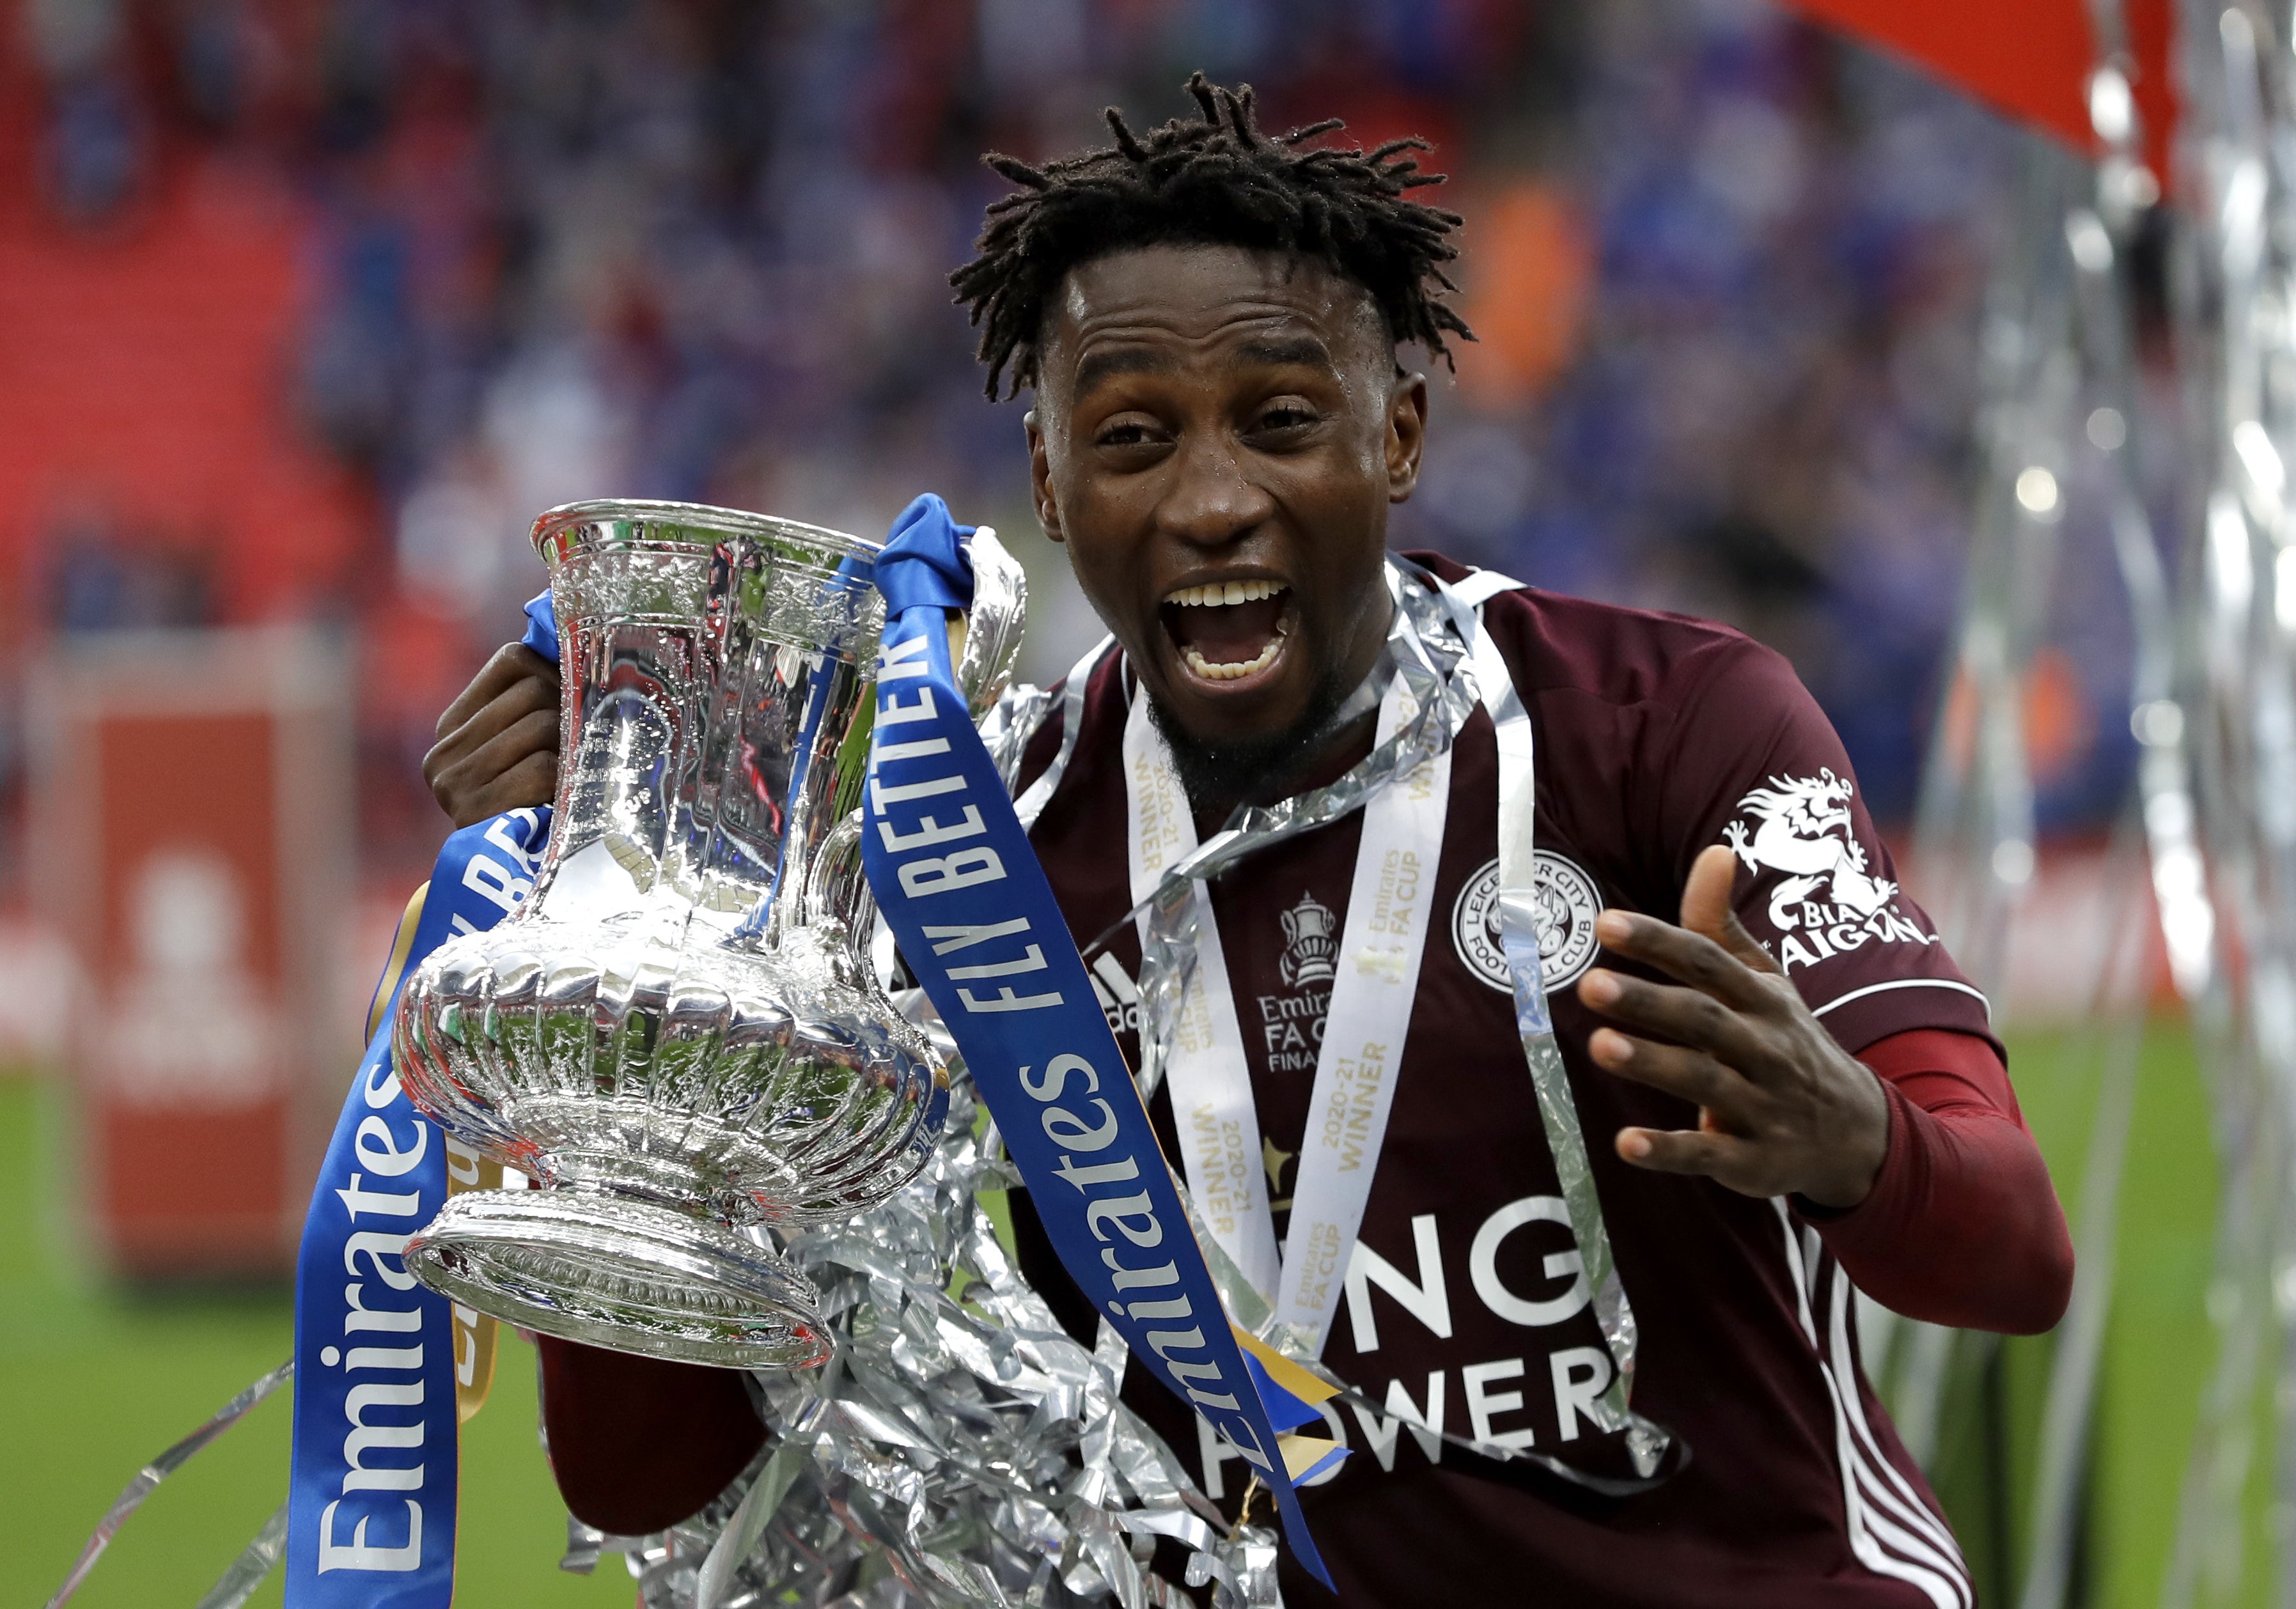 Wilfred Ndidi insists that lifting the FA Cup gives Leicester confidence they can repeat that success in the Carabao Cup this season (Kirsty Wigglesworth/PA)